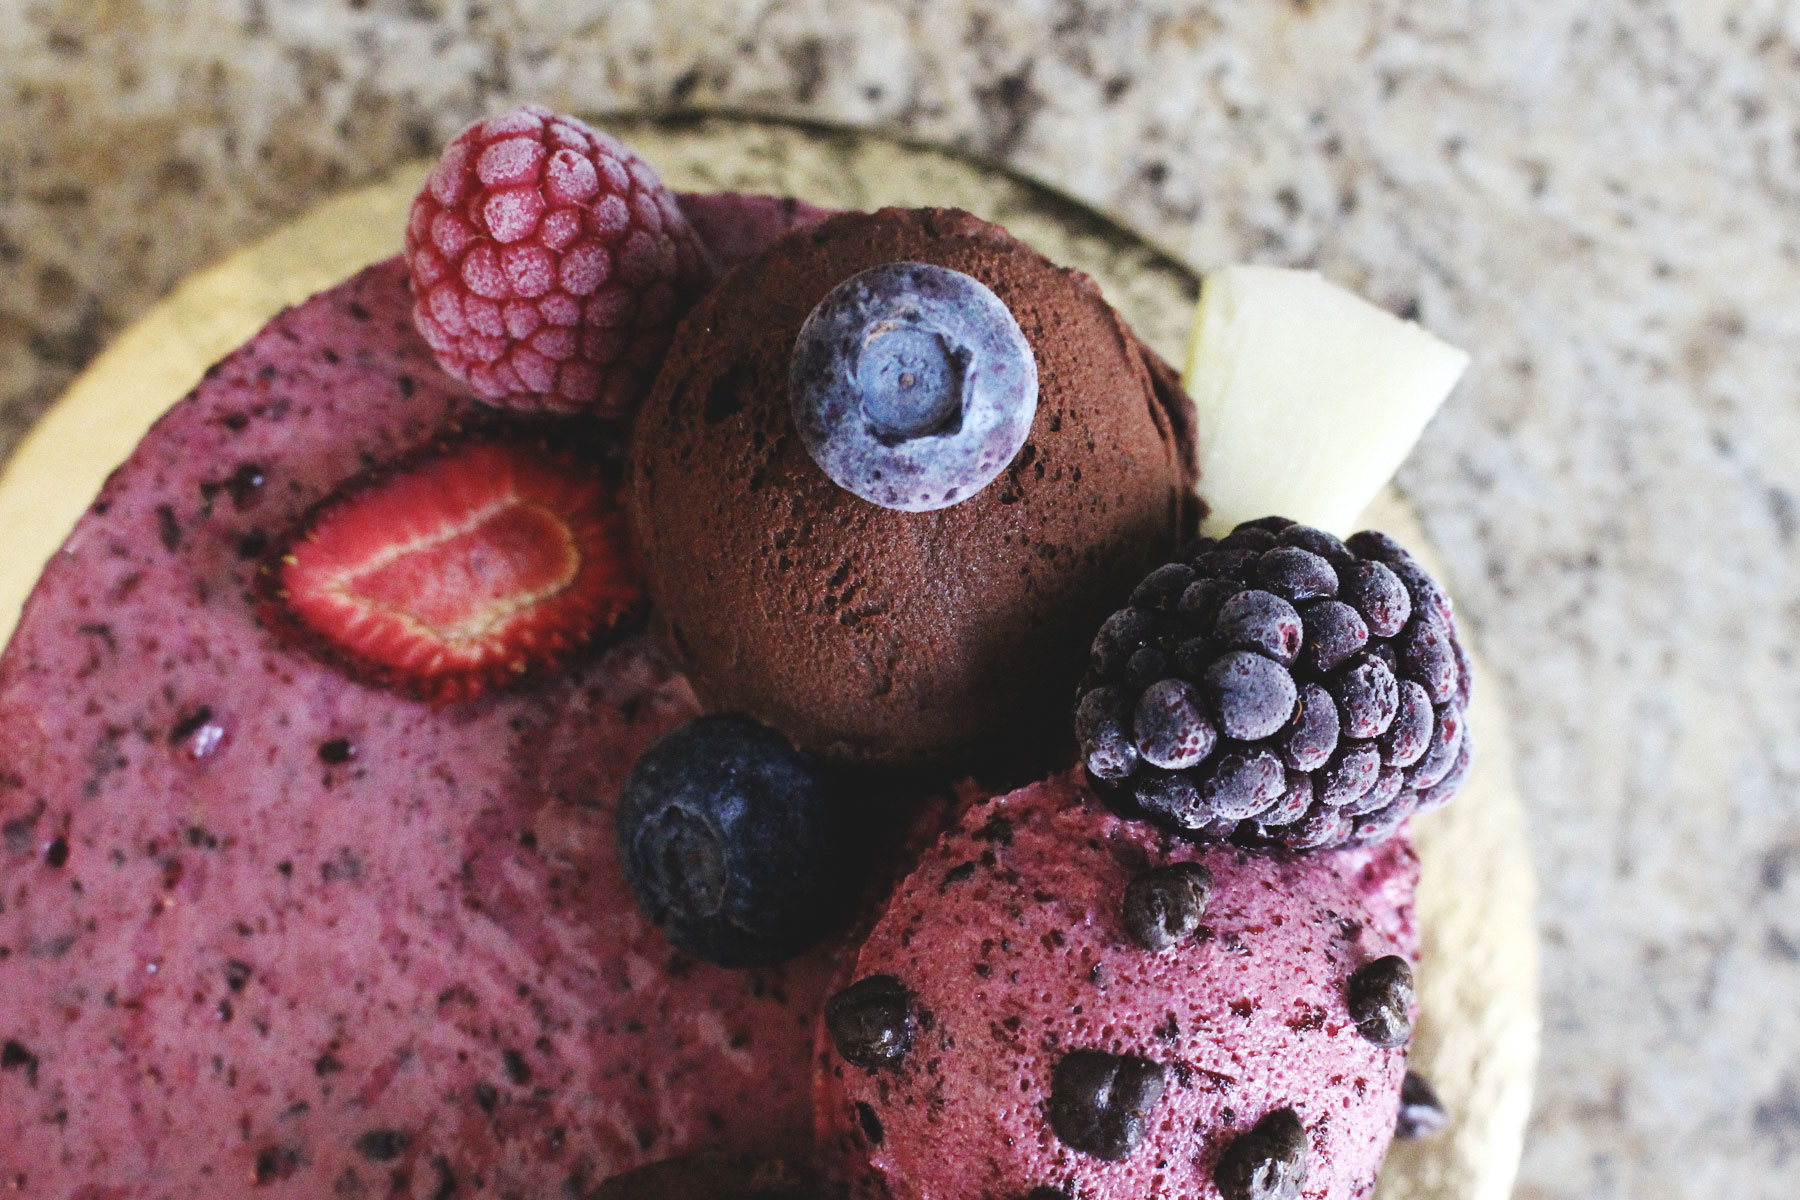 gelato cake topped with berries